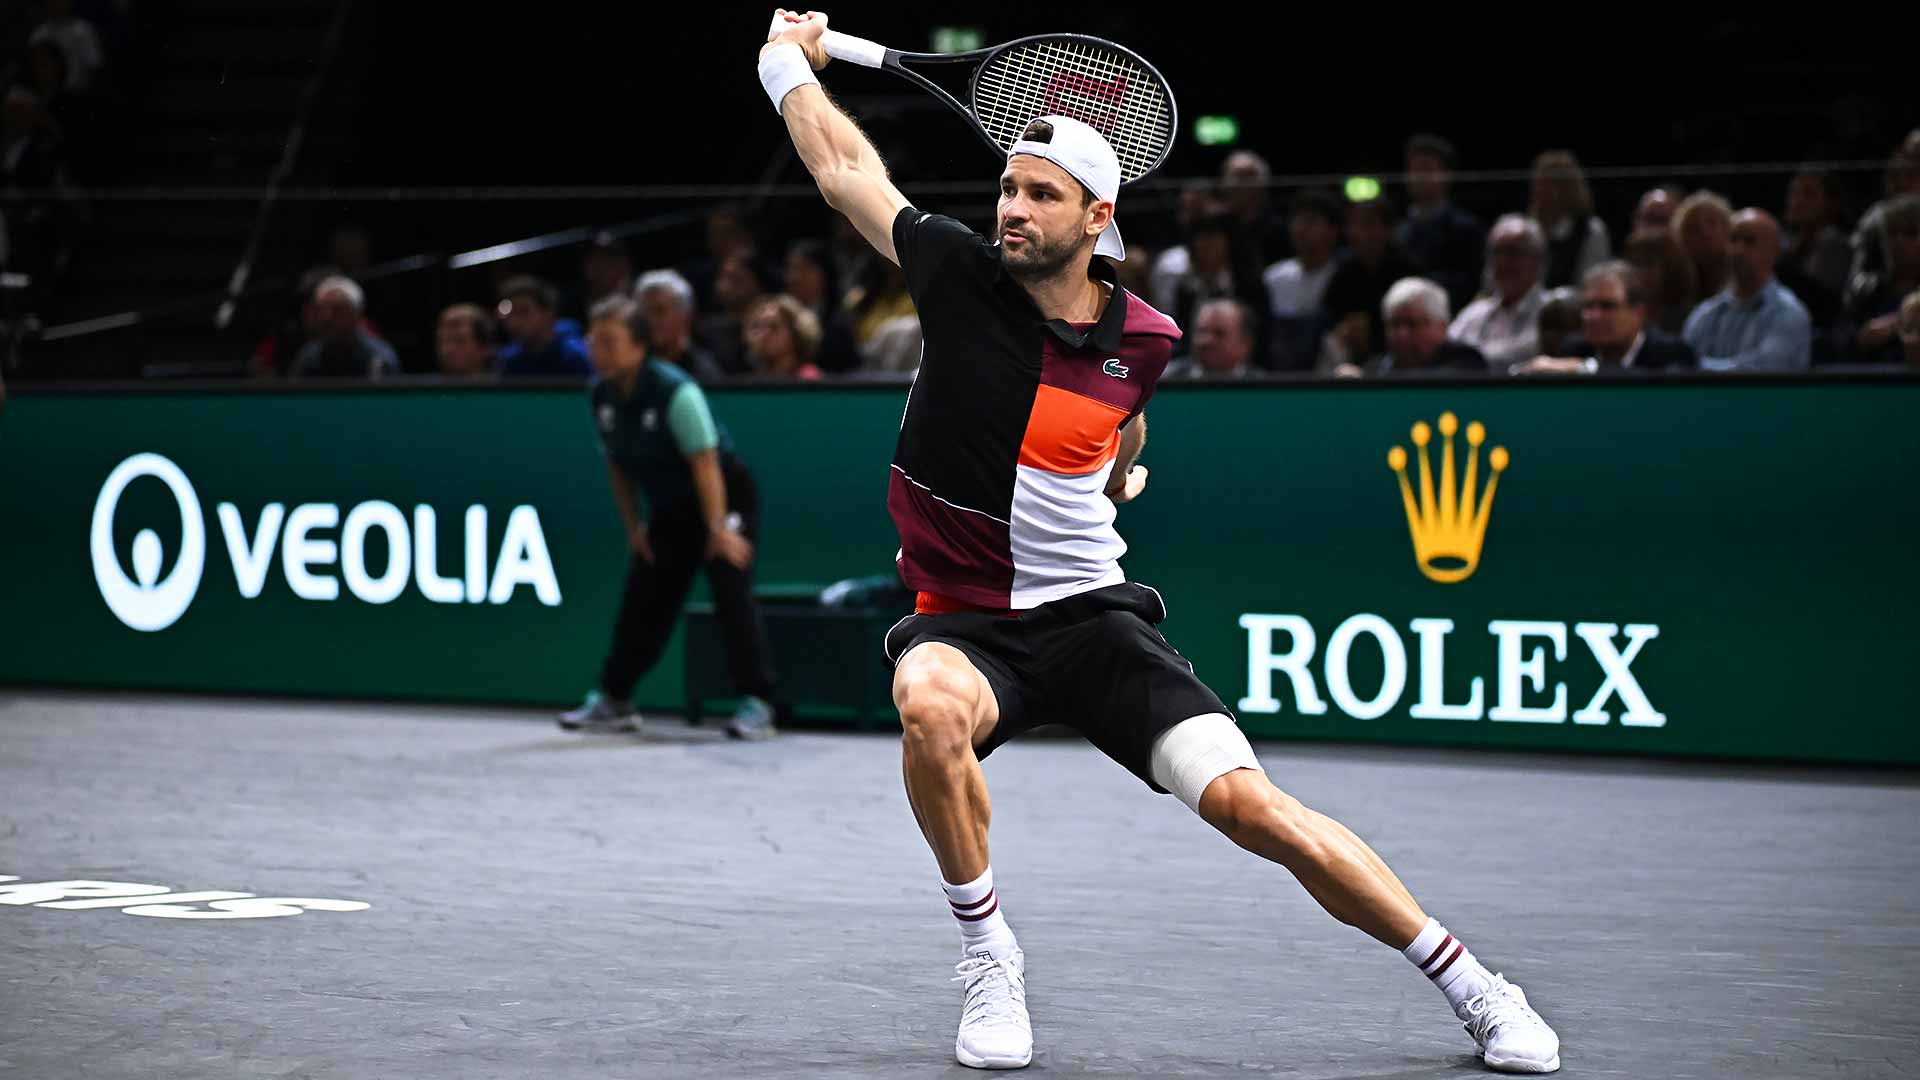 Grigor Dimitrov in Sunday's Paris final plays for his first title since winning the 2017 Nitto ATP Finals.